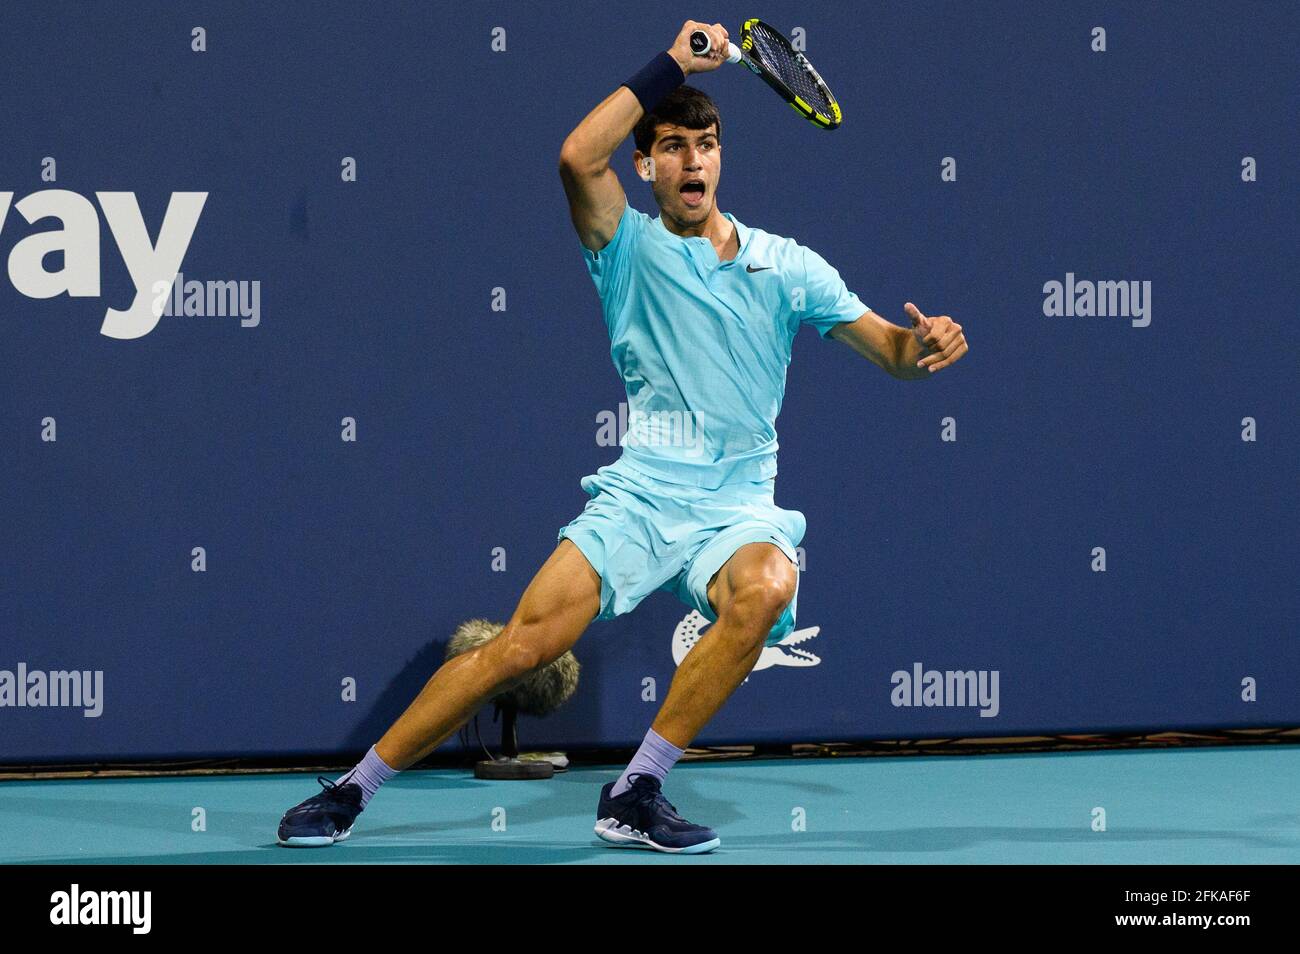 Miami Gardens, Florida, USA. 24th Mar, 2021. Carlos Alcaraz of Spain hits a forehand during his loss to Emil Ruusuvuori of Finland in the first round at the Miami Open on March 24, 2021 on the grounds of Hard Rock Stadium in Miami Gardens, Florida. Mike Lawrence/CSM/Alamy Live News Stock Photo